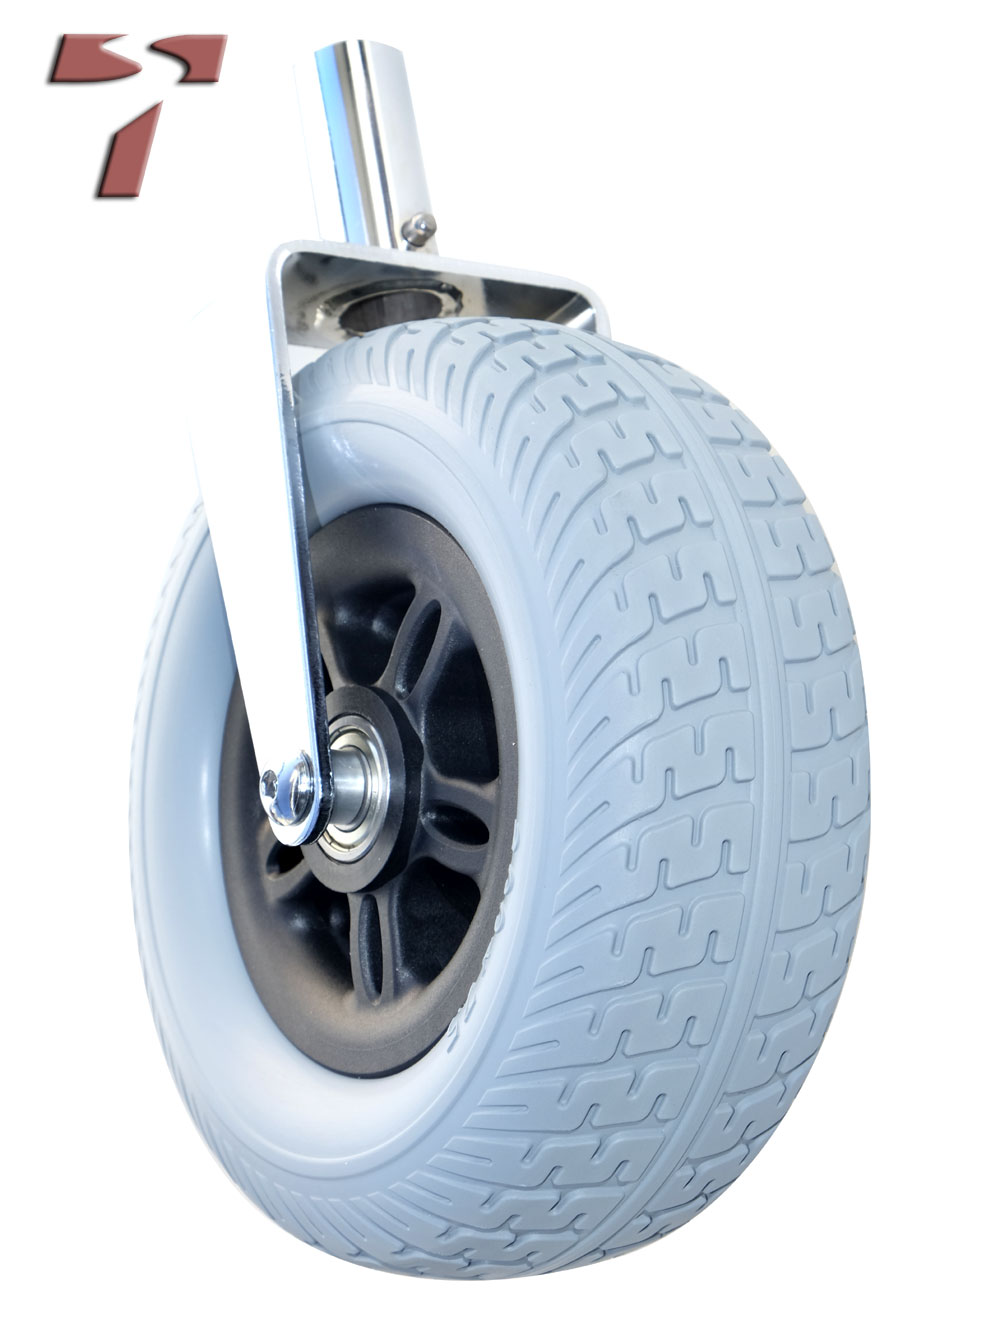 accessoires for the folding scooter: wider front wheel and fork